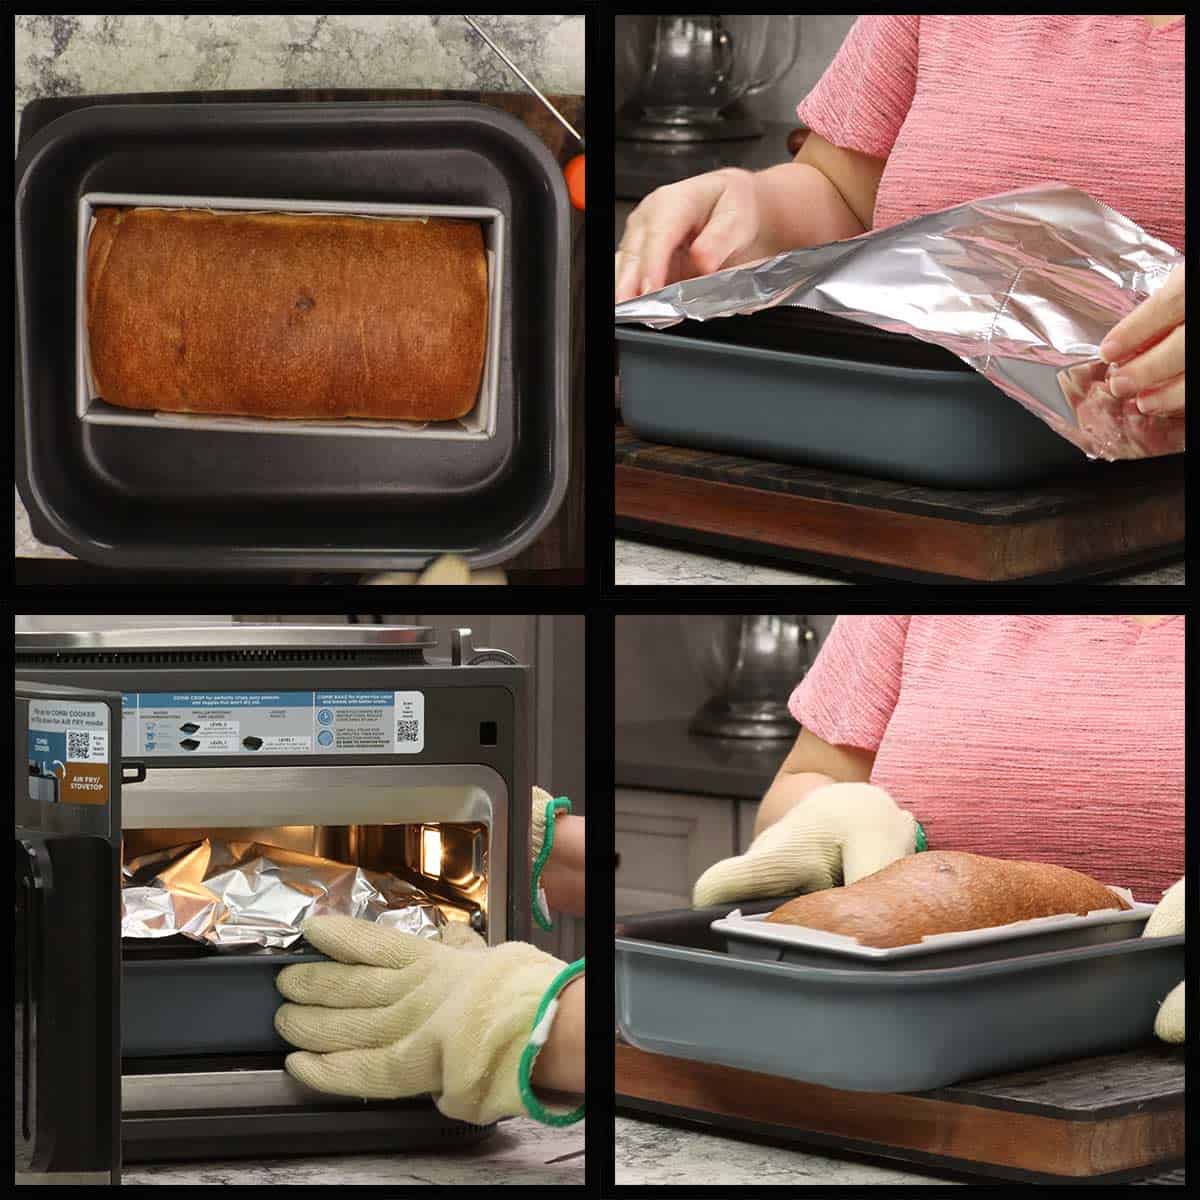 covering the bread with aluminum foil.